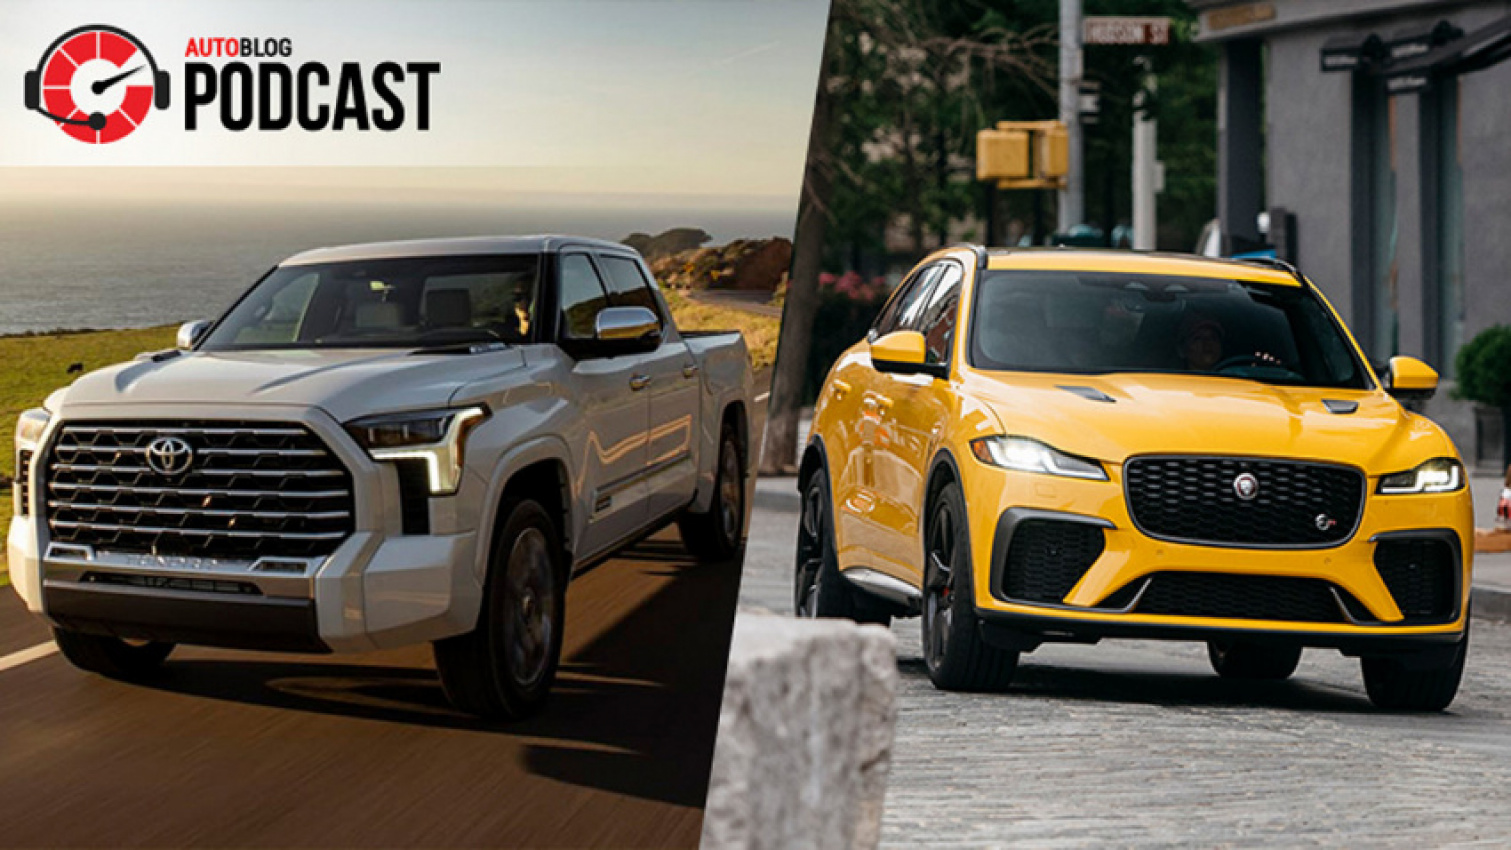 autos, cars, jaguar, toyota, cadillac, crossover, ford, hatchback, hybrid, jaguar f-pace, luxury, performance, podcasts, sedan, truck, used car buying, weird car news, 2022 toyota tundra capstone and jaguar f-pace svr | autoblog podcast #719